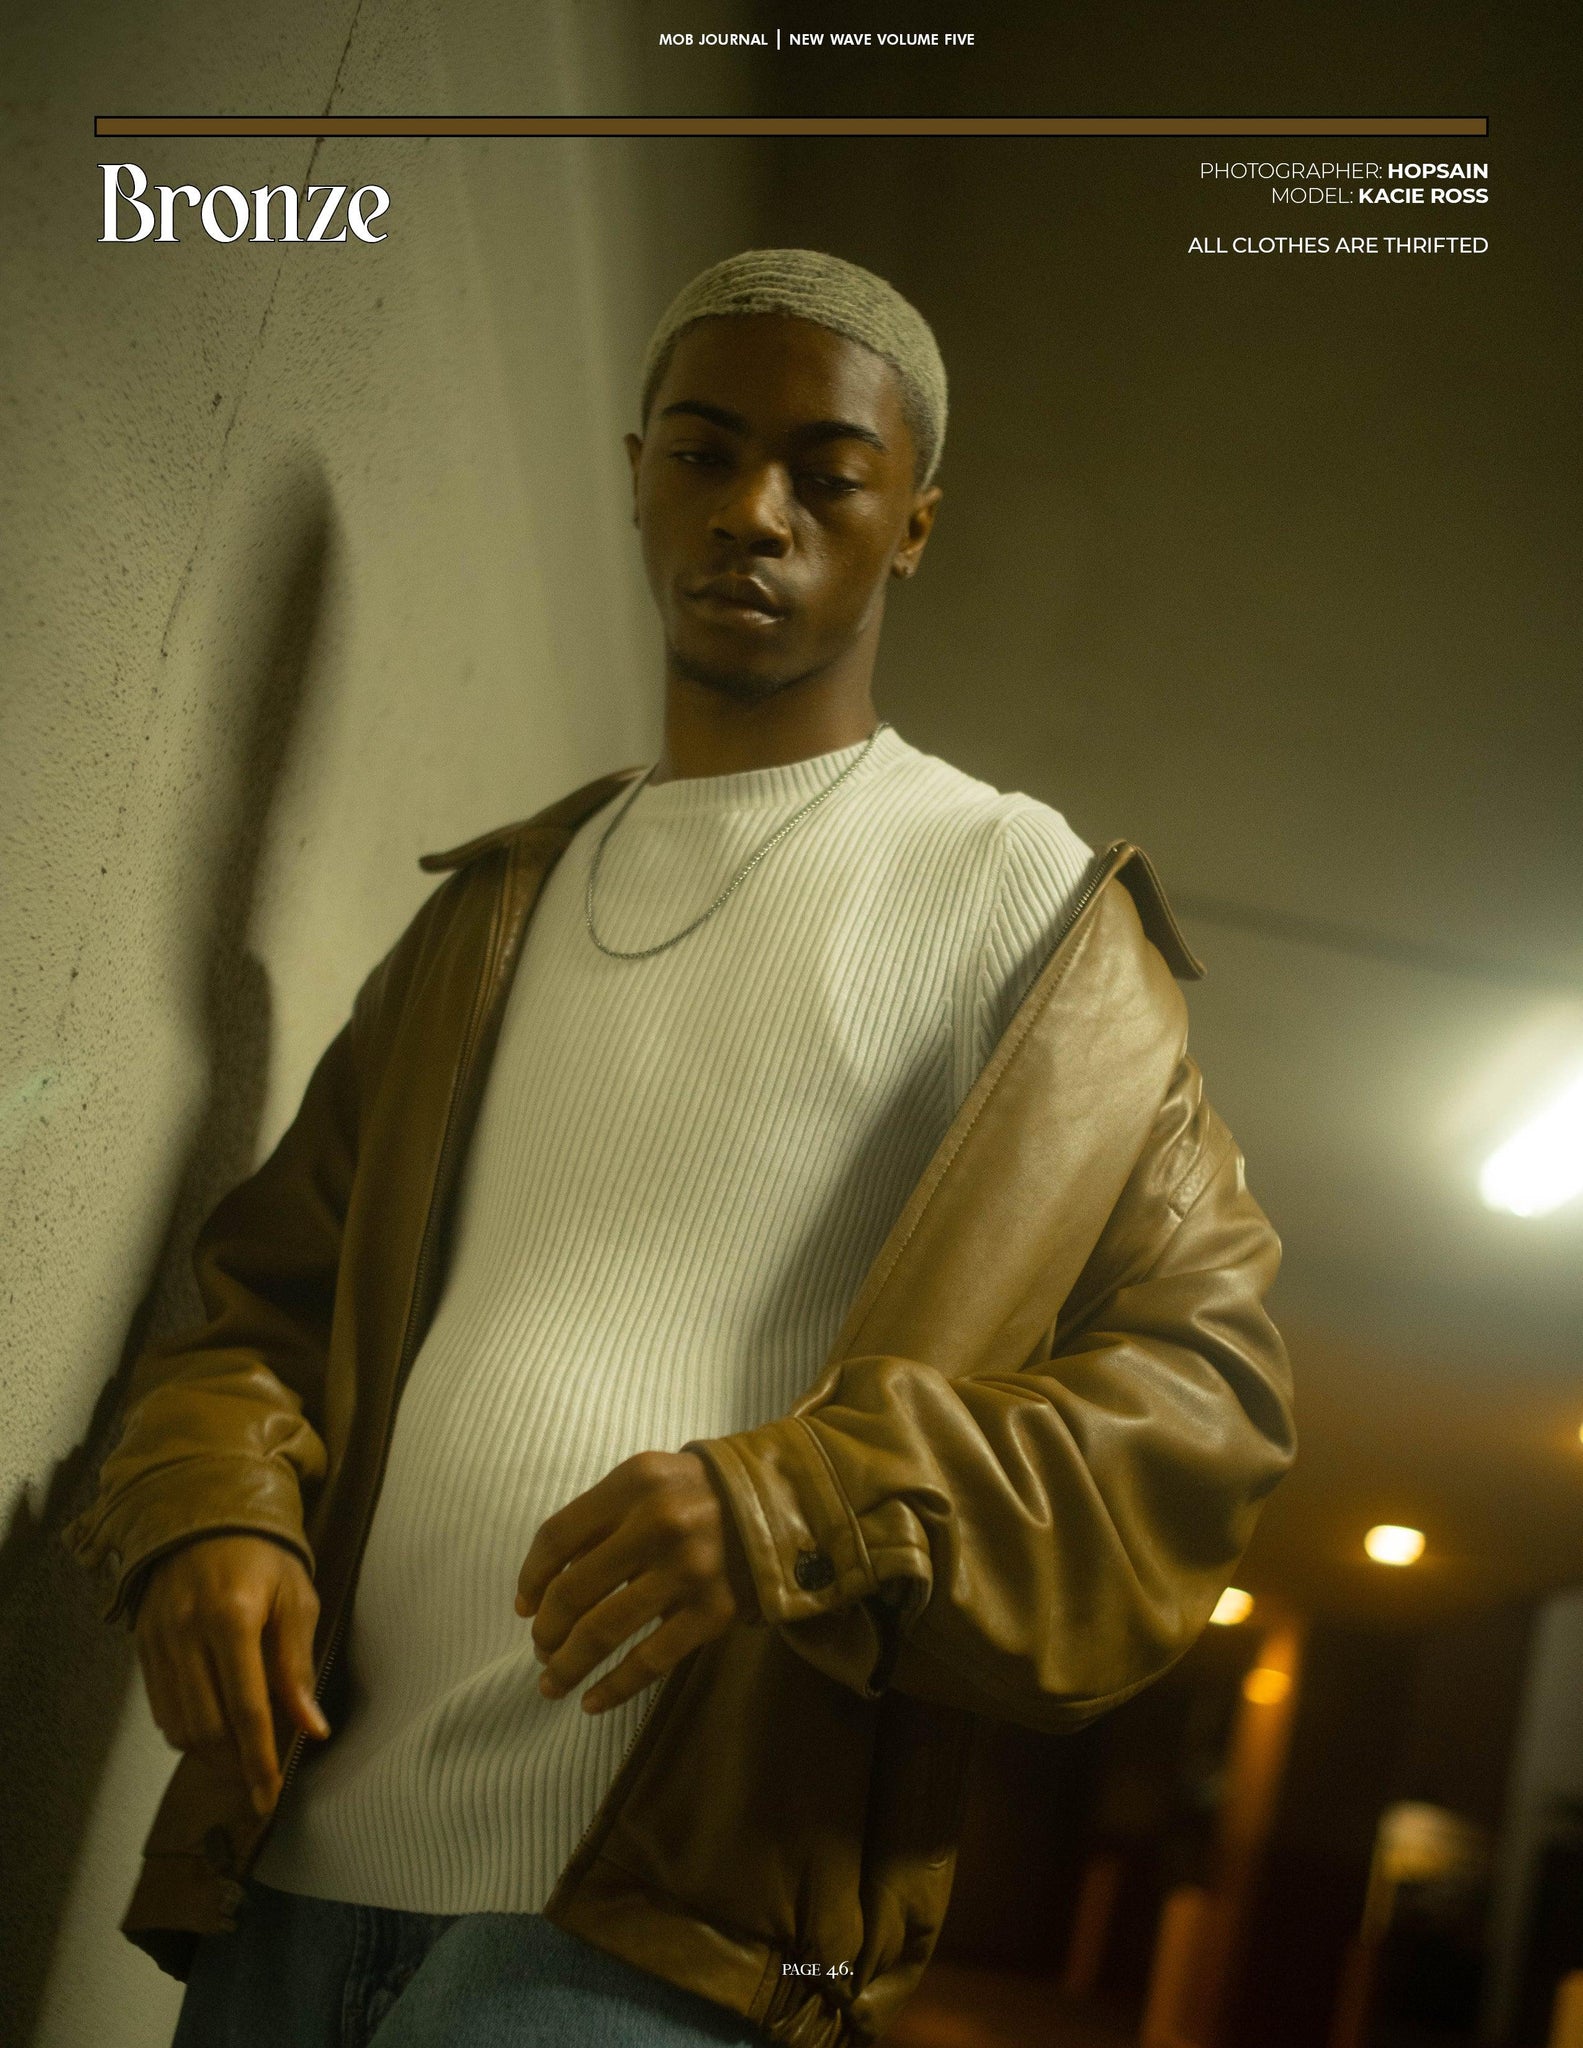 NEW WAVE | VOLUME FIVE | ISSUE #02 - Mob Journal